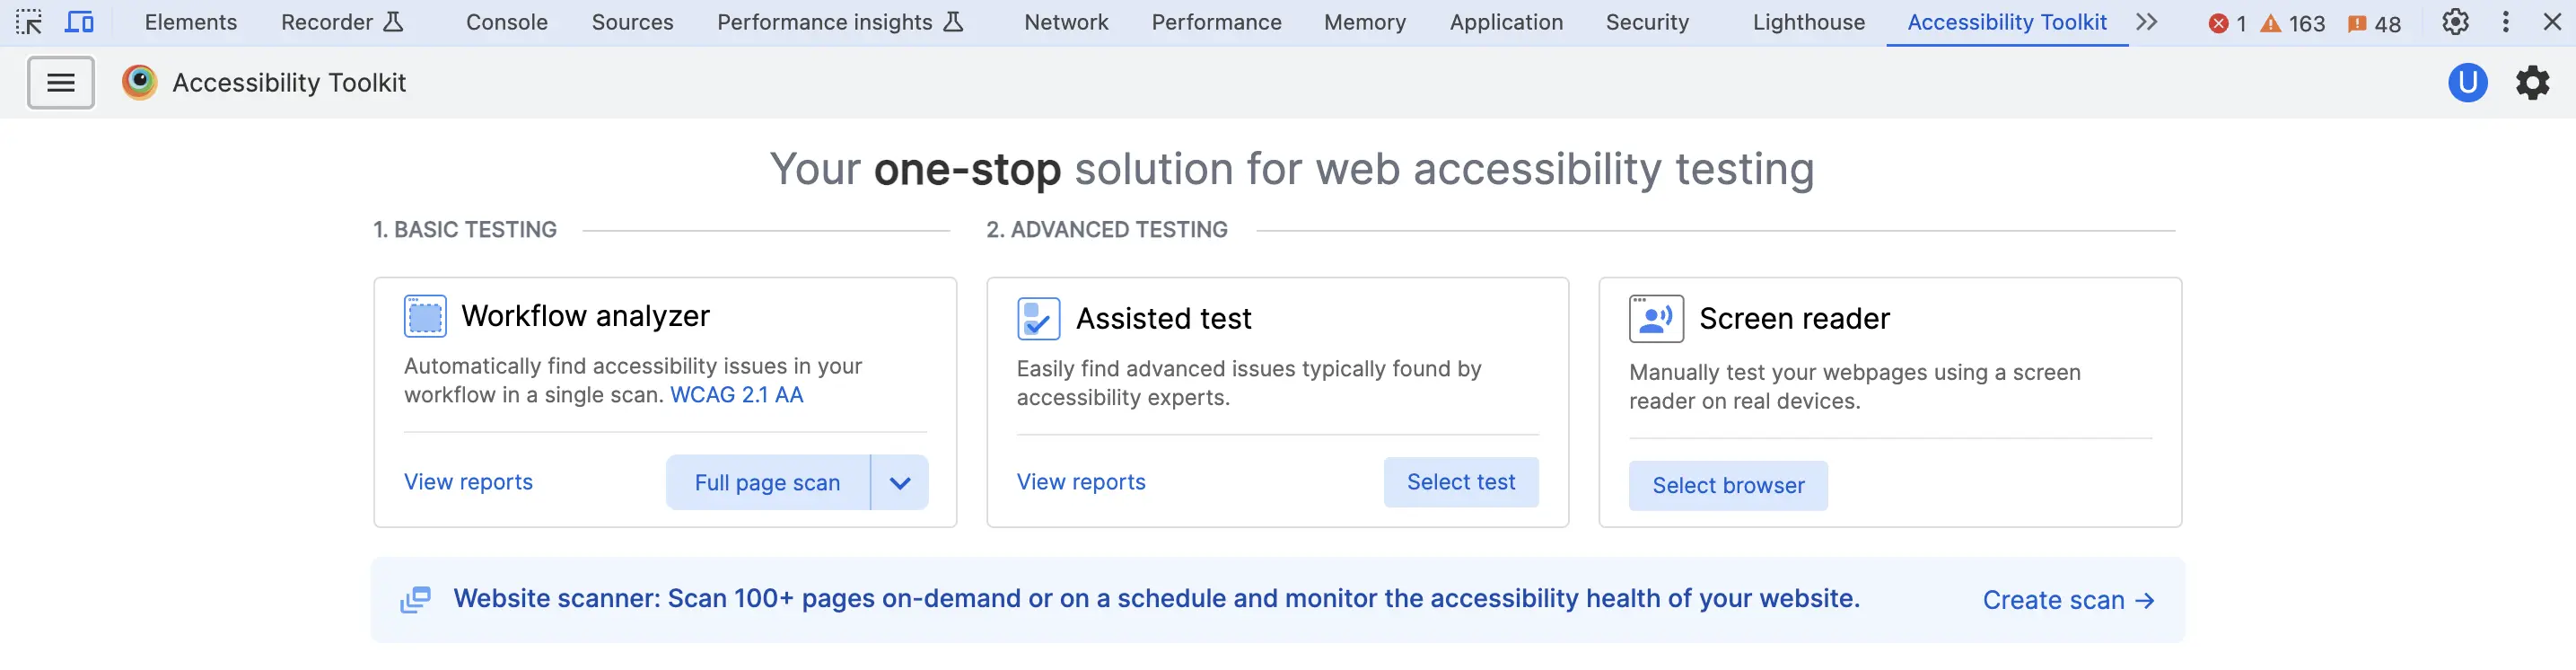 BrowserStack Accessibility Toolkit in Chrome DevTools